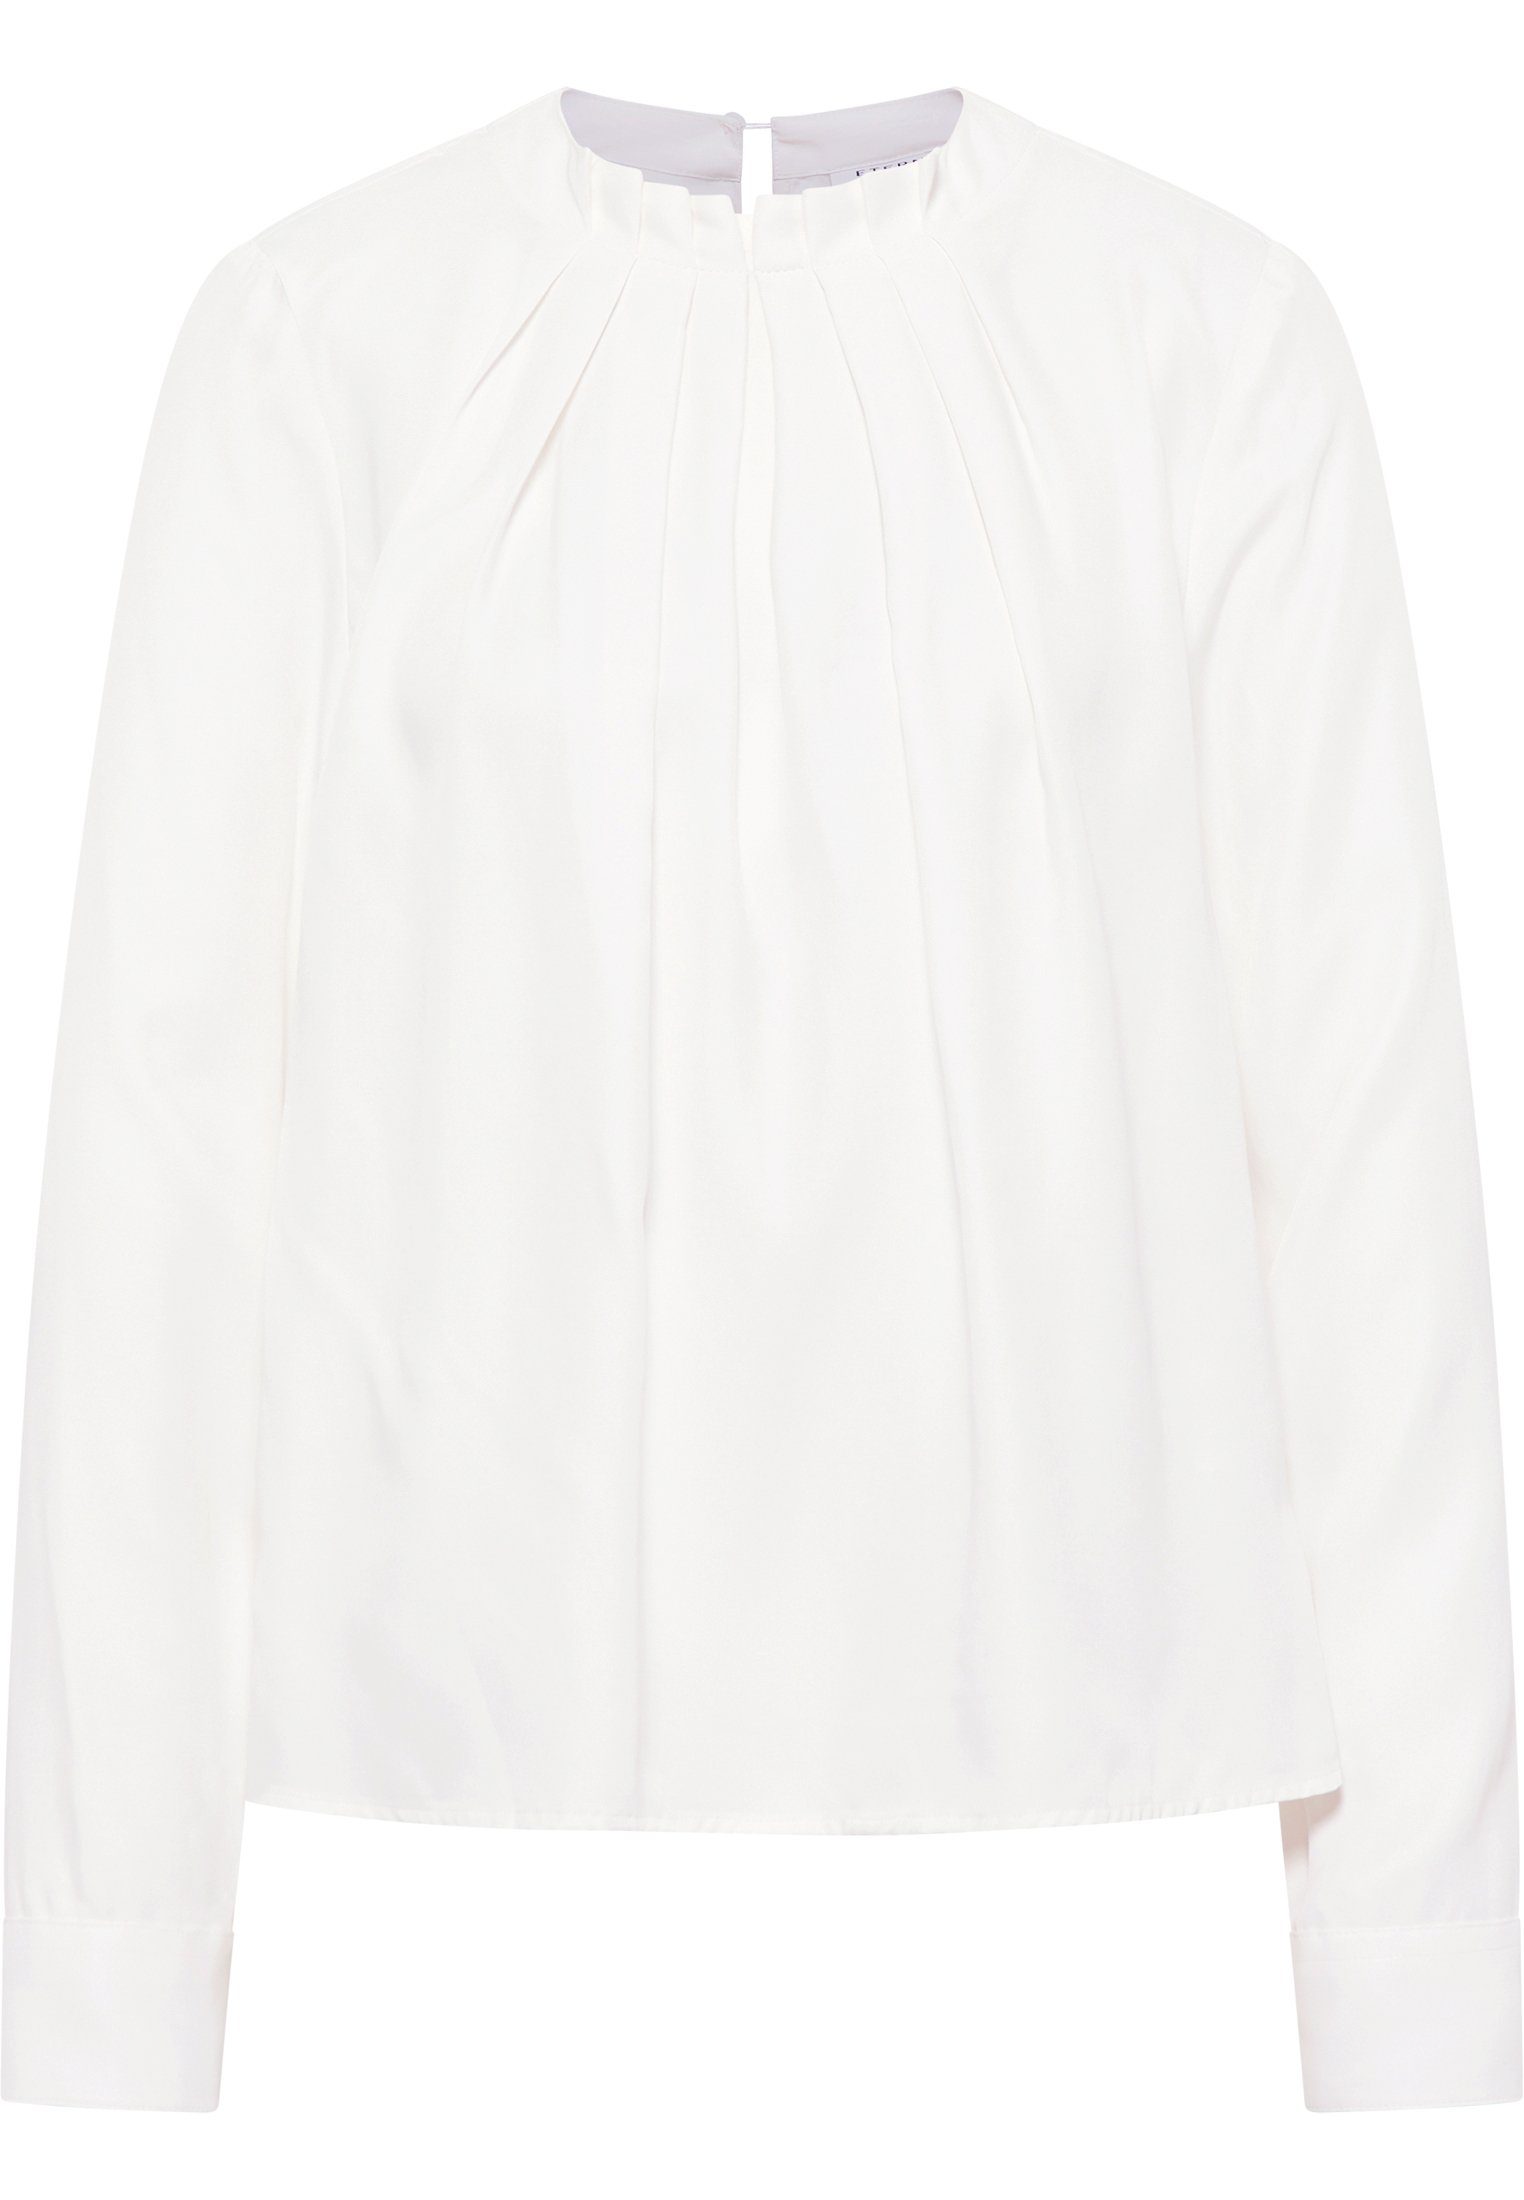 FIT Shirtbluse LOOSE off-white Eterna